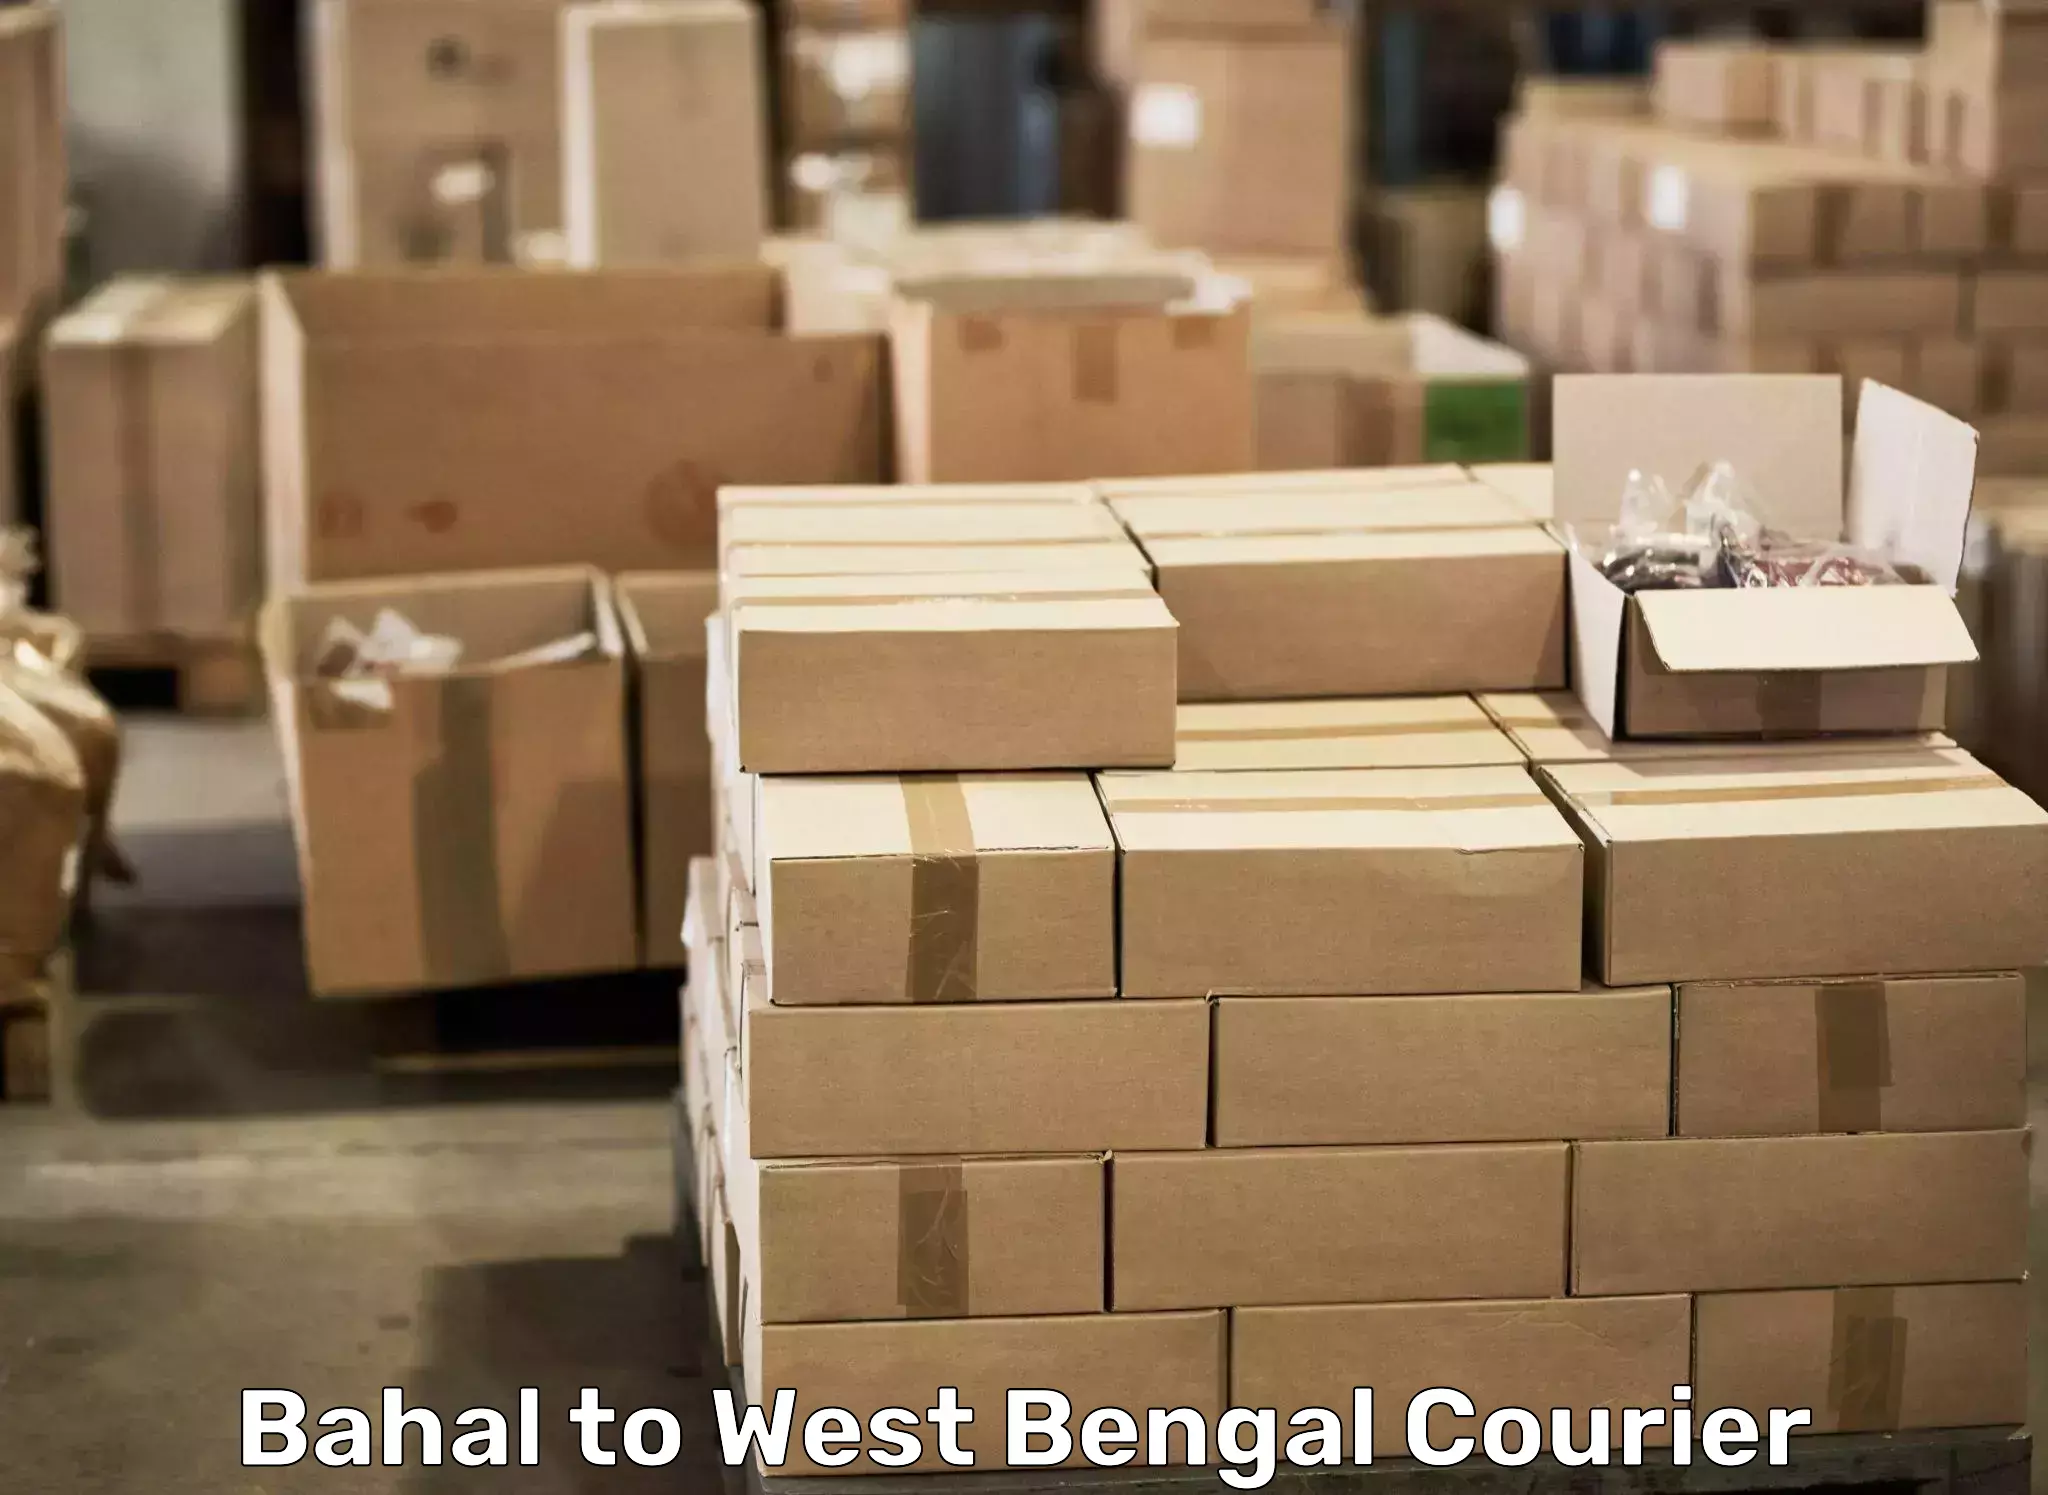 Hassle-free relocation in Bahal to Algarah